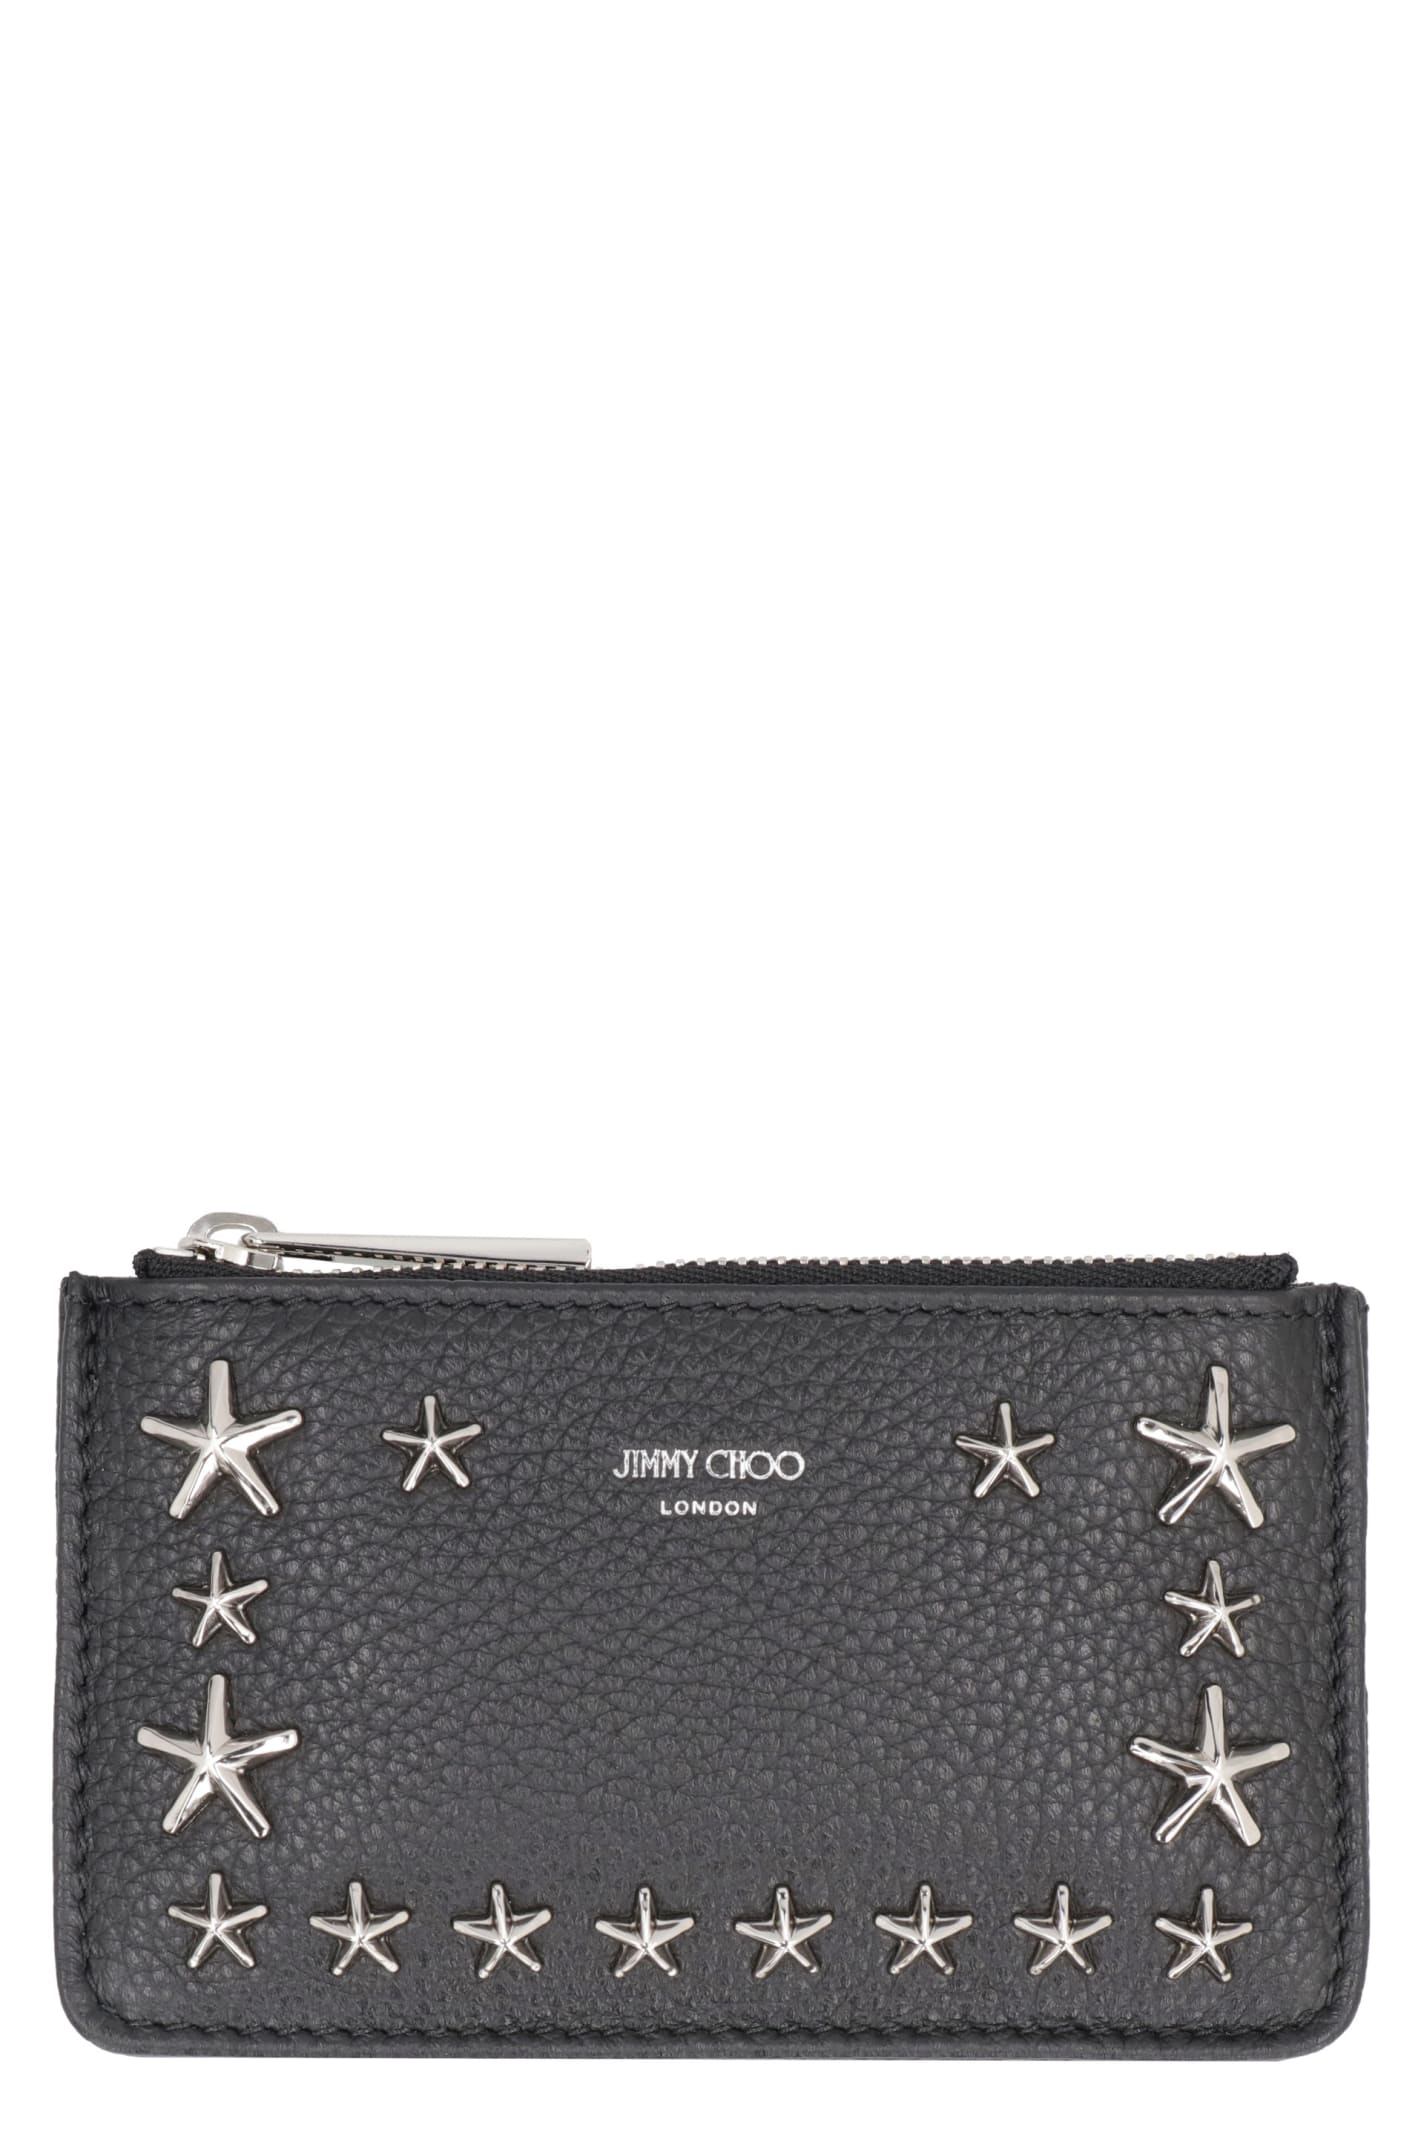 Jimmy Choo Nancy Leather Coin Purse Pouch In Black | ModeSens